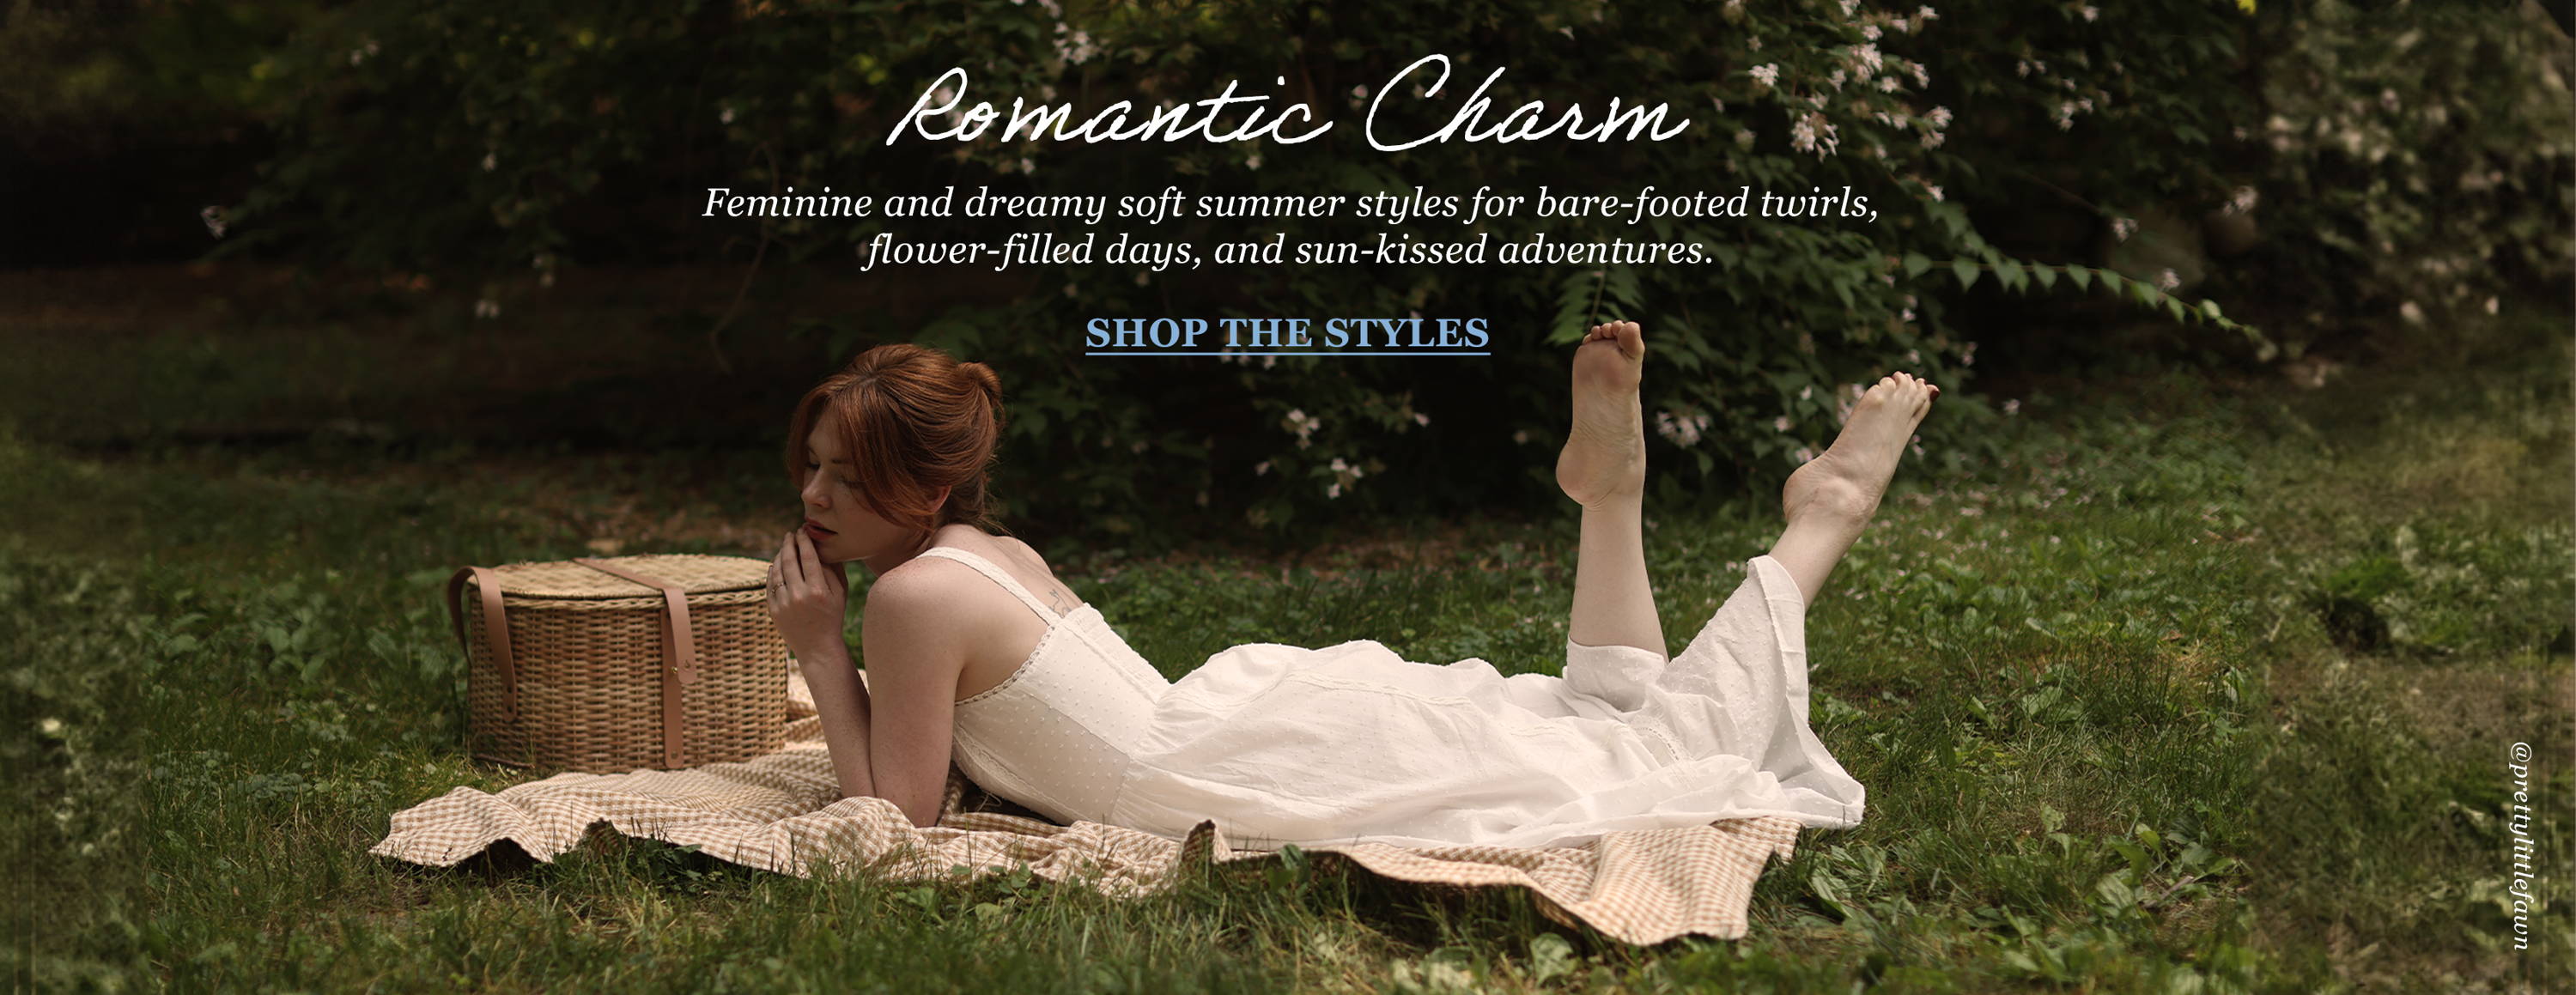 Romantic Charm Feminine and dreamy soft summer styles for bare-footed twirls, flower-filled days, and sun kissed adventures.